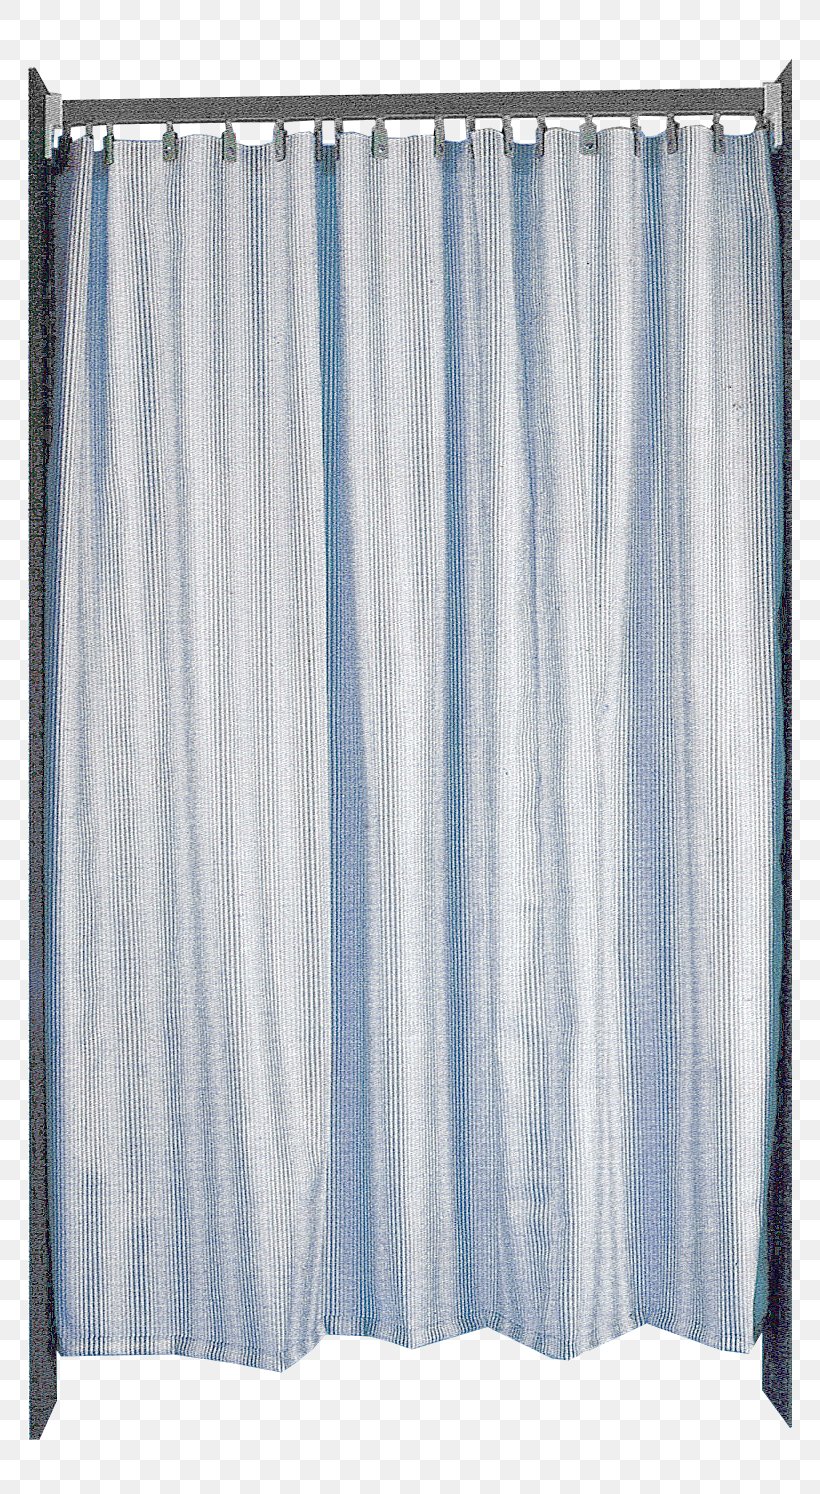 Curtain Product, PNG, 764x1494px, Curtain, Blue, Interior Design, Shower Curtain, Window Treatment Download Free